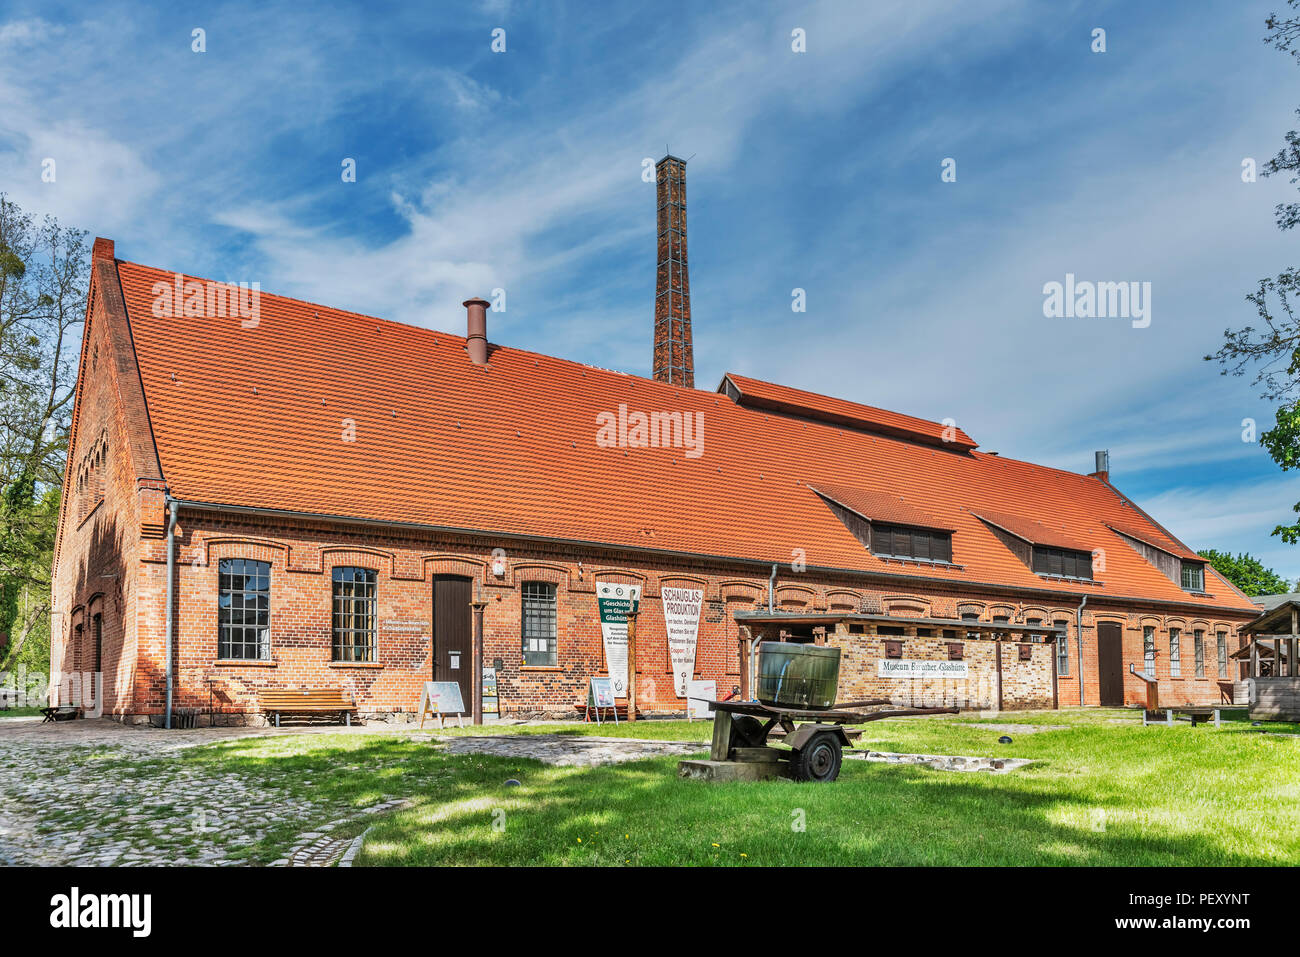 New Glashuette building in the museum village Baruther Glashuette, Baruth / Mark, district Teltow-Flaeming, Brandenburg, Germany, Europe Stock Photo